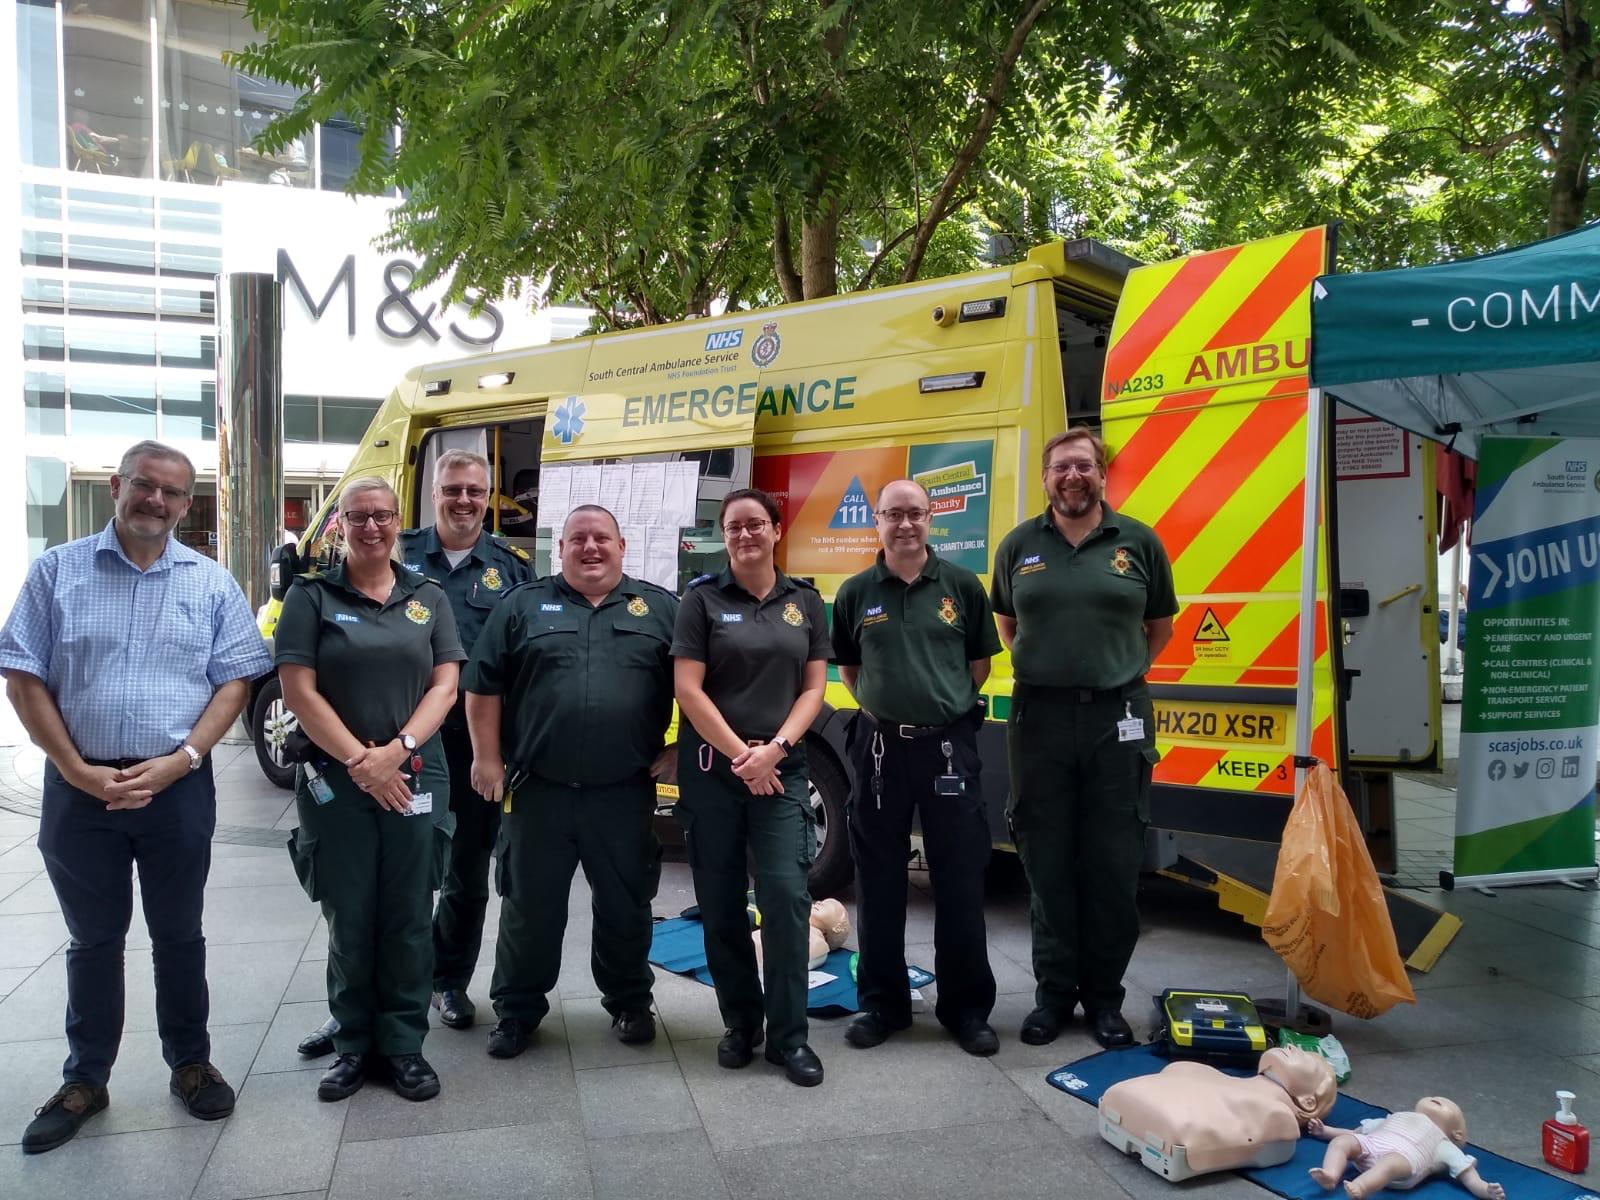 SCAS colleagues standing together in front of the vehicle